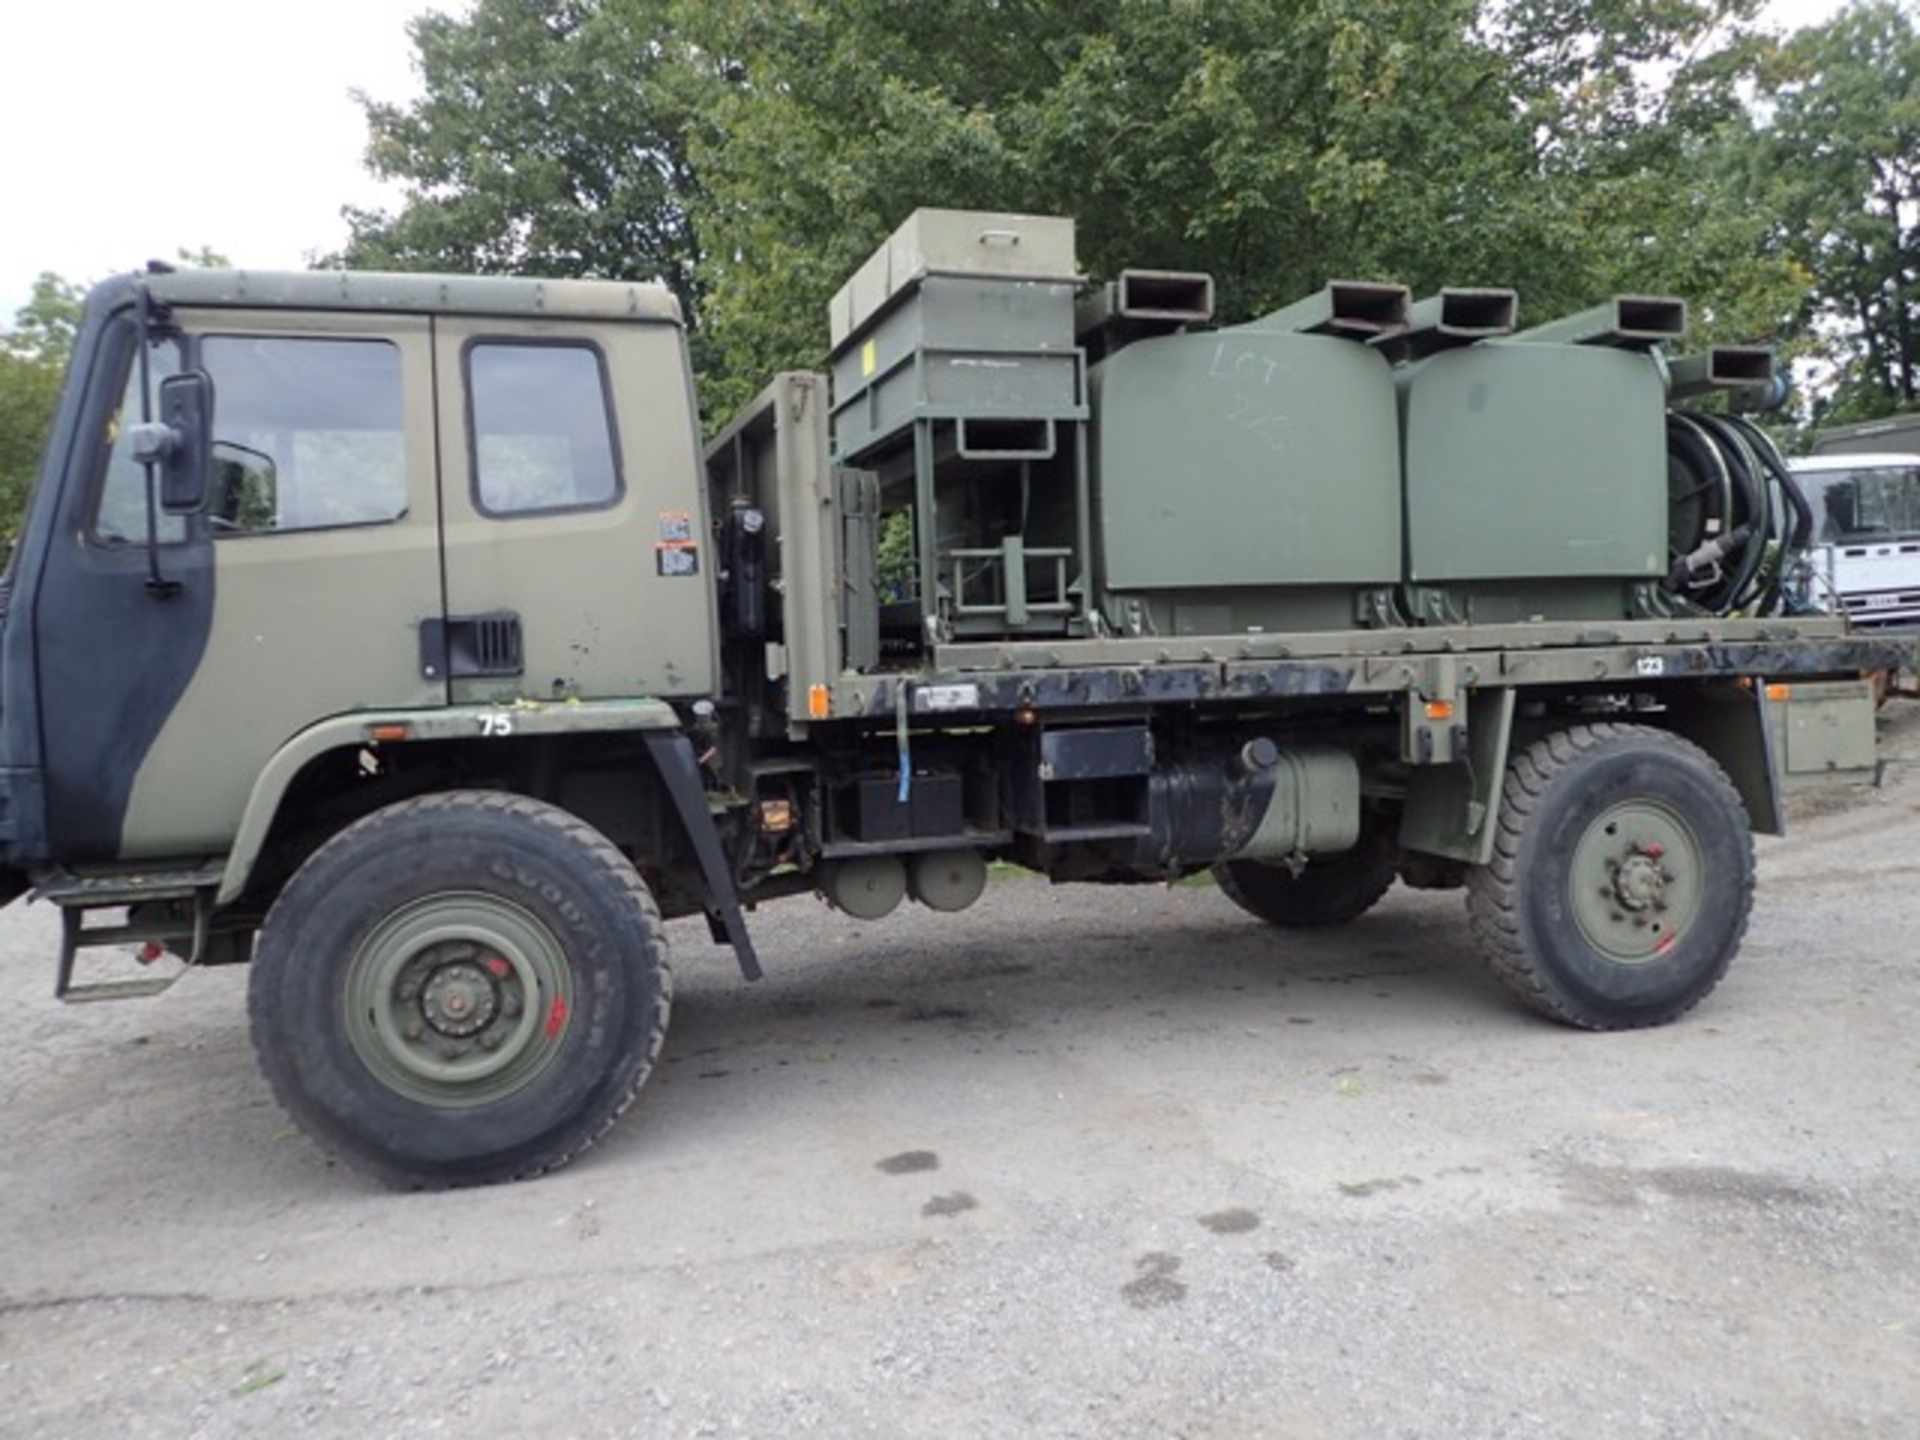 DAF 45-150 4x4 refuel wagon (Ex MOD) S/N: 123435 Recorded Mileage: 3182 c/w discharge hoses, - Image 2 of 10